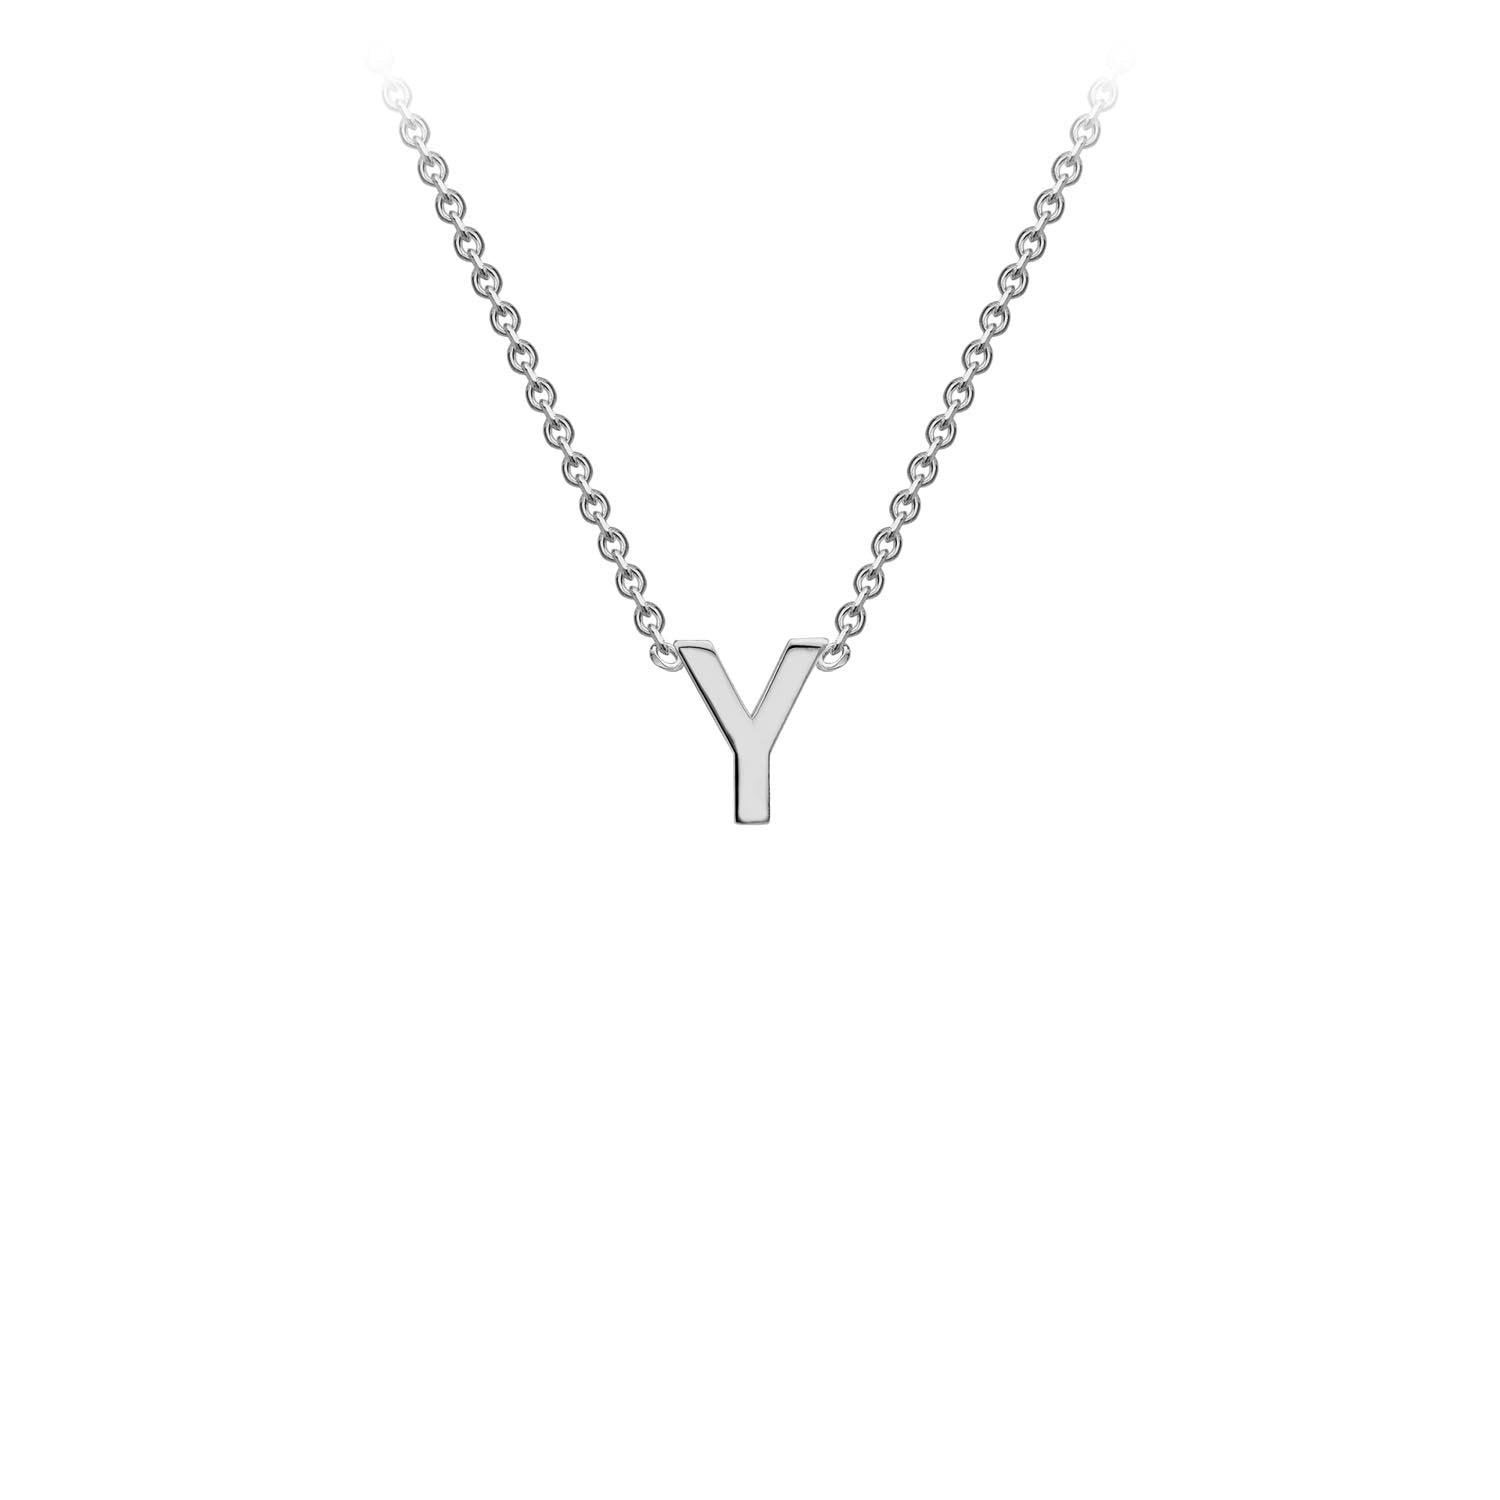 9ct White Gold 'Y' Petite Initial Adjustable Letter Necklace 38/43cm